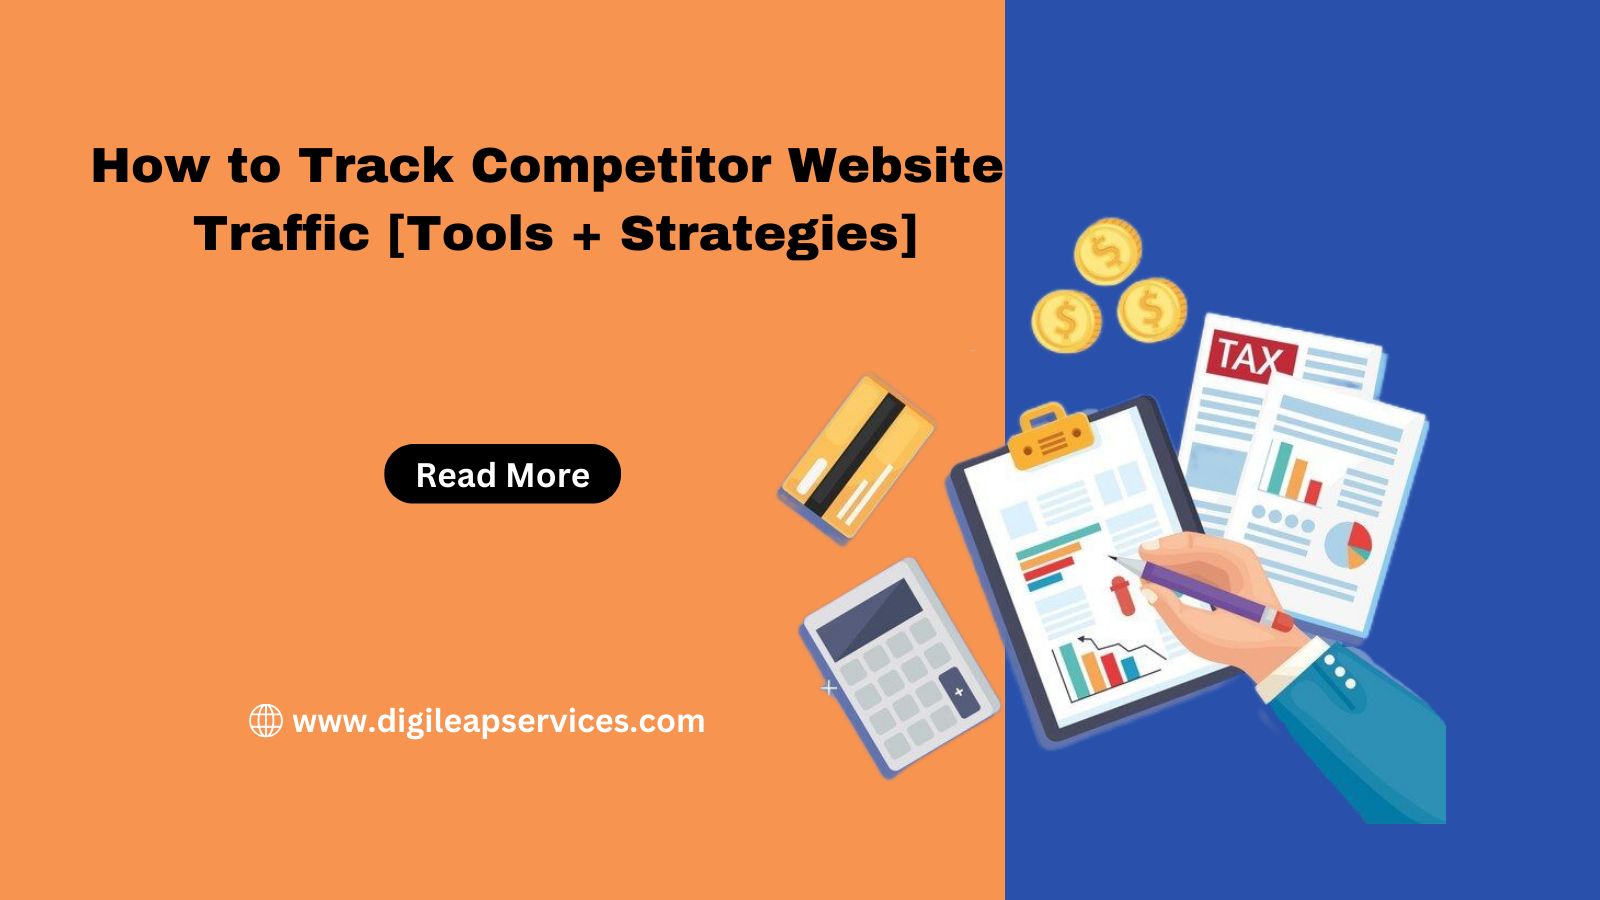 How to Track Competitor Website Traffic [Tools + Strategies]